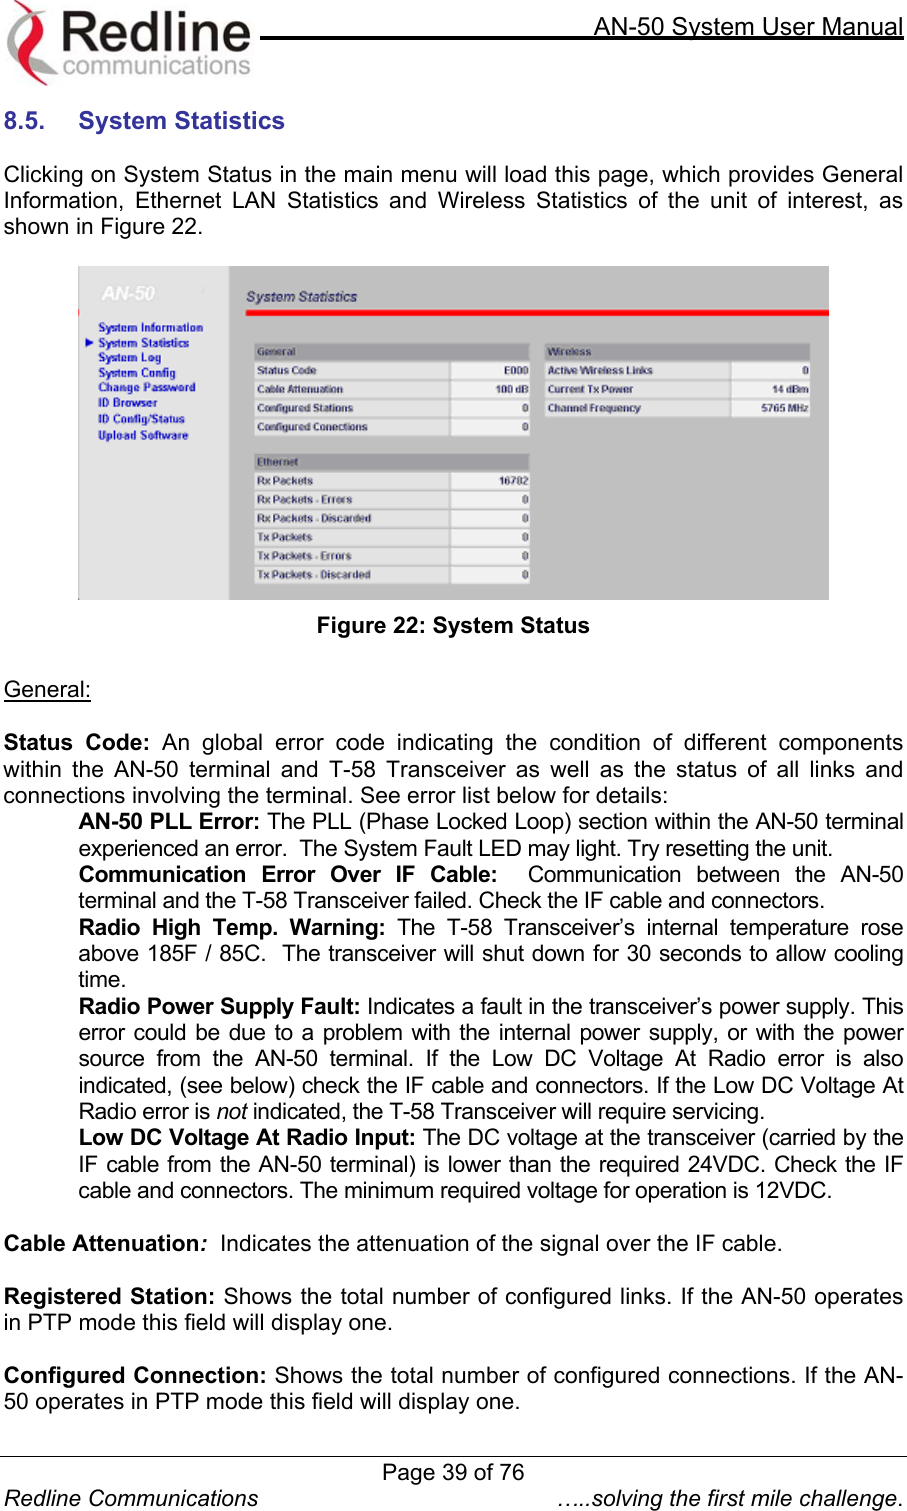     AN-50 System User Manual  Redline Communications  …..solving the first mile challenge. 8.5.  System Statistics   Clicking on System Status in the main menu will load this page, which provides General Information, Ethernet LAN Statistics and Wireless Statistics of the unit of interest, as shown in Figure 22.   Figure 22: System Status  General:  Status Code: An global error code indicating the condition of different components within the AN-50 terminal and T-58 Transceiver as well as the status of all links and connections involving the terminal. See error list below for details: AN-50 PLL Error: The PLL (Phase Locked Loop) section within the AN-50 terminal experienced an error.  The System Fault LED may light. Try resetting the unit. Communication Error Over IF Cable:  Communication between the AN-50 terminal and the T-58 Transceiver failed. Check the IF cable and connectors. Radio High Temp. Warning: The T-58 Transceiver’s internal temperature rose above 185F / 85C.  The transceiver will shut down for 30 seconds to allow cooling time. Radio Power Supply Fault: Indicates a fault in the transceiver’s power supply. This error could be due to a problem with the internal power supply, or with the power source from the AN-50 terminal. If the Low DC Voltage At Radio error is also indicated, (see below) check the IF cable and connectors. If the Low DC Voltage At Radio error is not indicated, the T-58 Transceiver will require servicing. Low DC Voltage At Radio Input: The DC voltage at the transceiver (carried by the IF cable from the AN-50 terminal) is lower than the required 24VDC. Check the IF cable and connectors. The minimum required voltage for operation is 12VDC.  Cable Attenuation:  Indicates the attenuation of the signal over the IF cable.  Registered Station: Shows the total number of configured links. If the AN-50 operates in PTP mode this field will display one.  Configured Connection: Shows the total number of configured connections. If the AN-50 operates in PTP mode this field will display one. Page 39 of 76